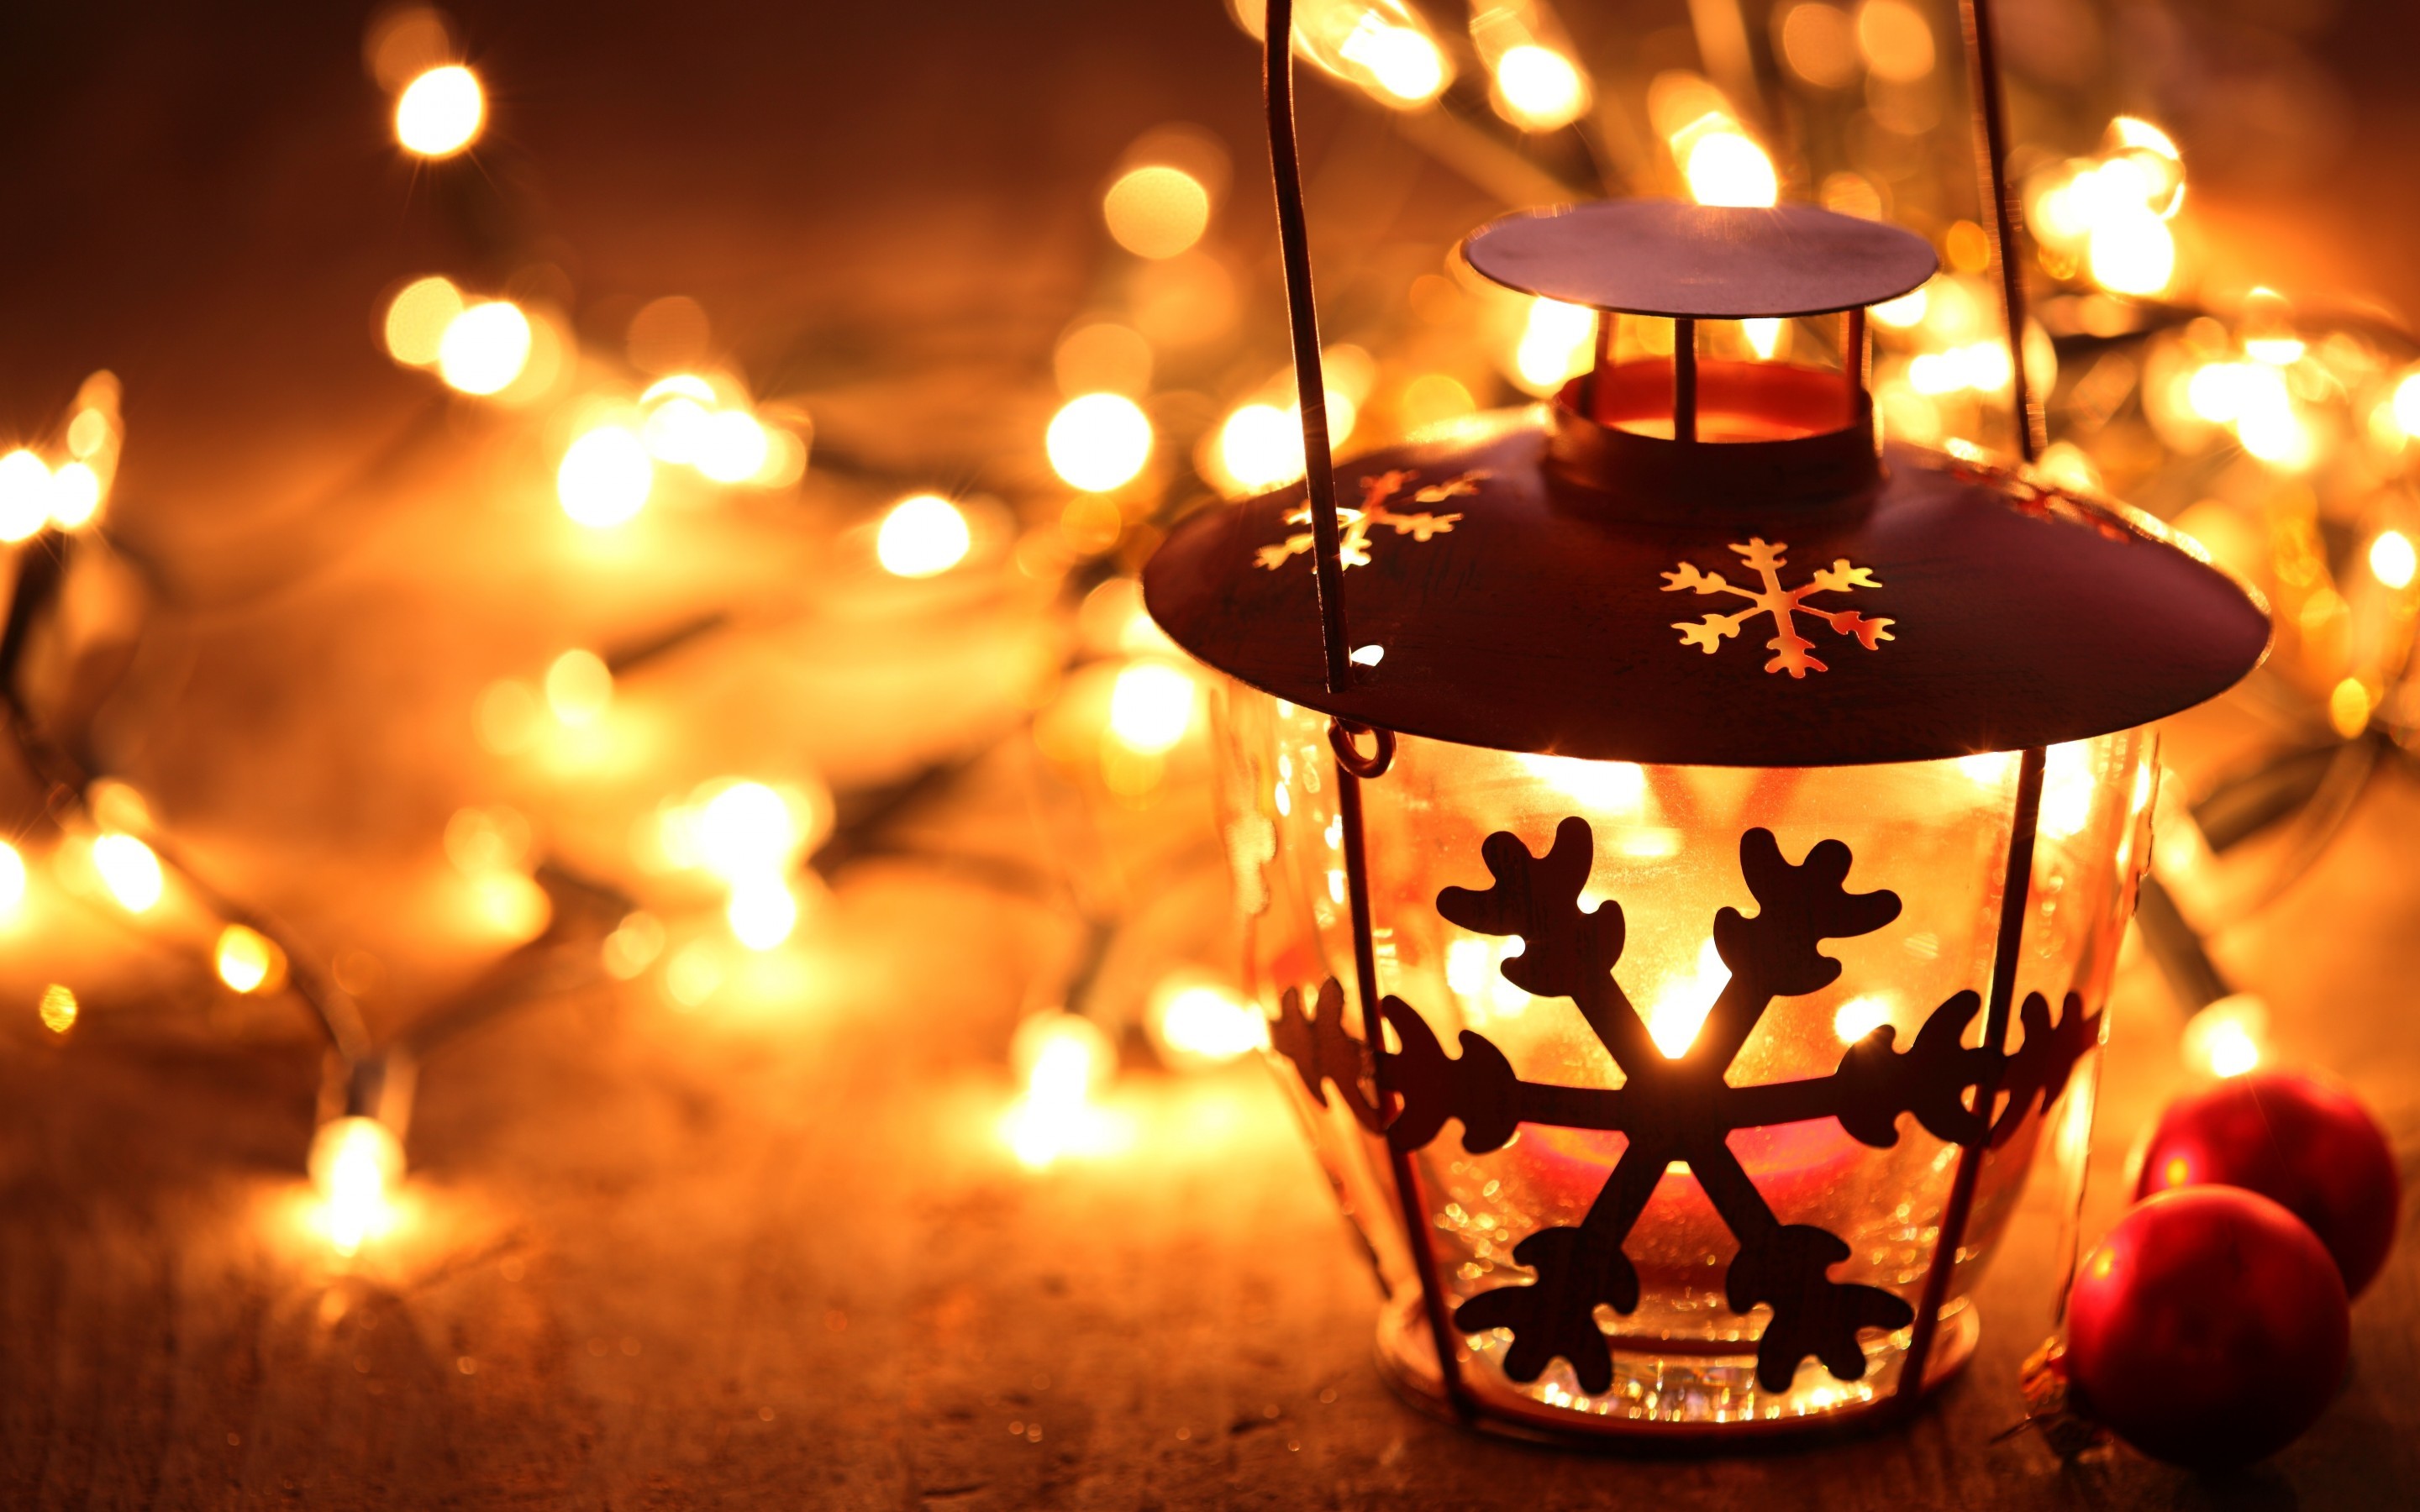 2880x1800 snowflake lantern on wooden floor with yellow candle light, christmas hd  wallpaper widescreen, desktop